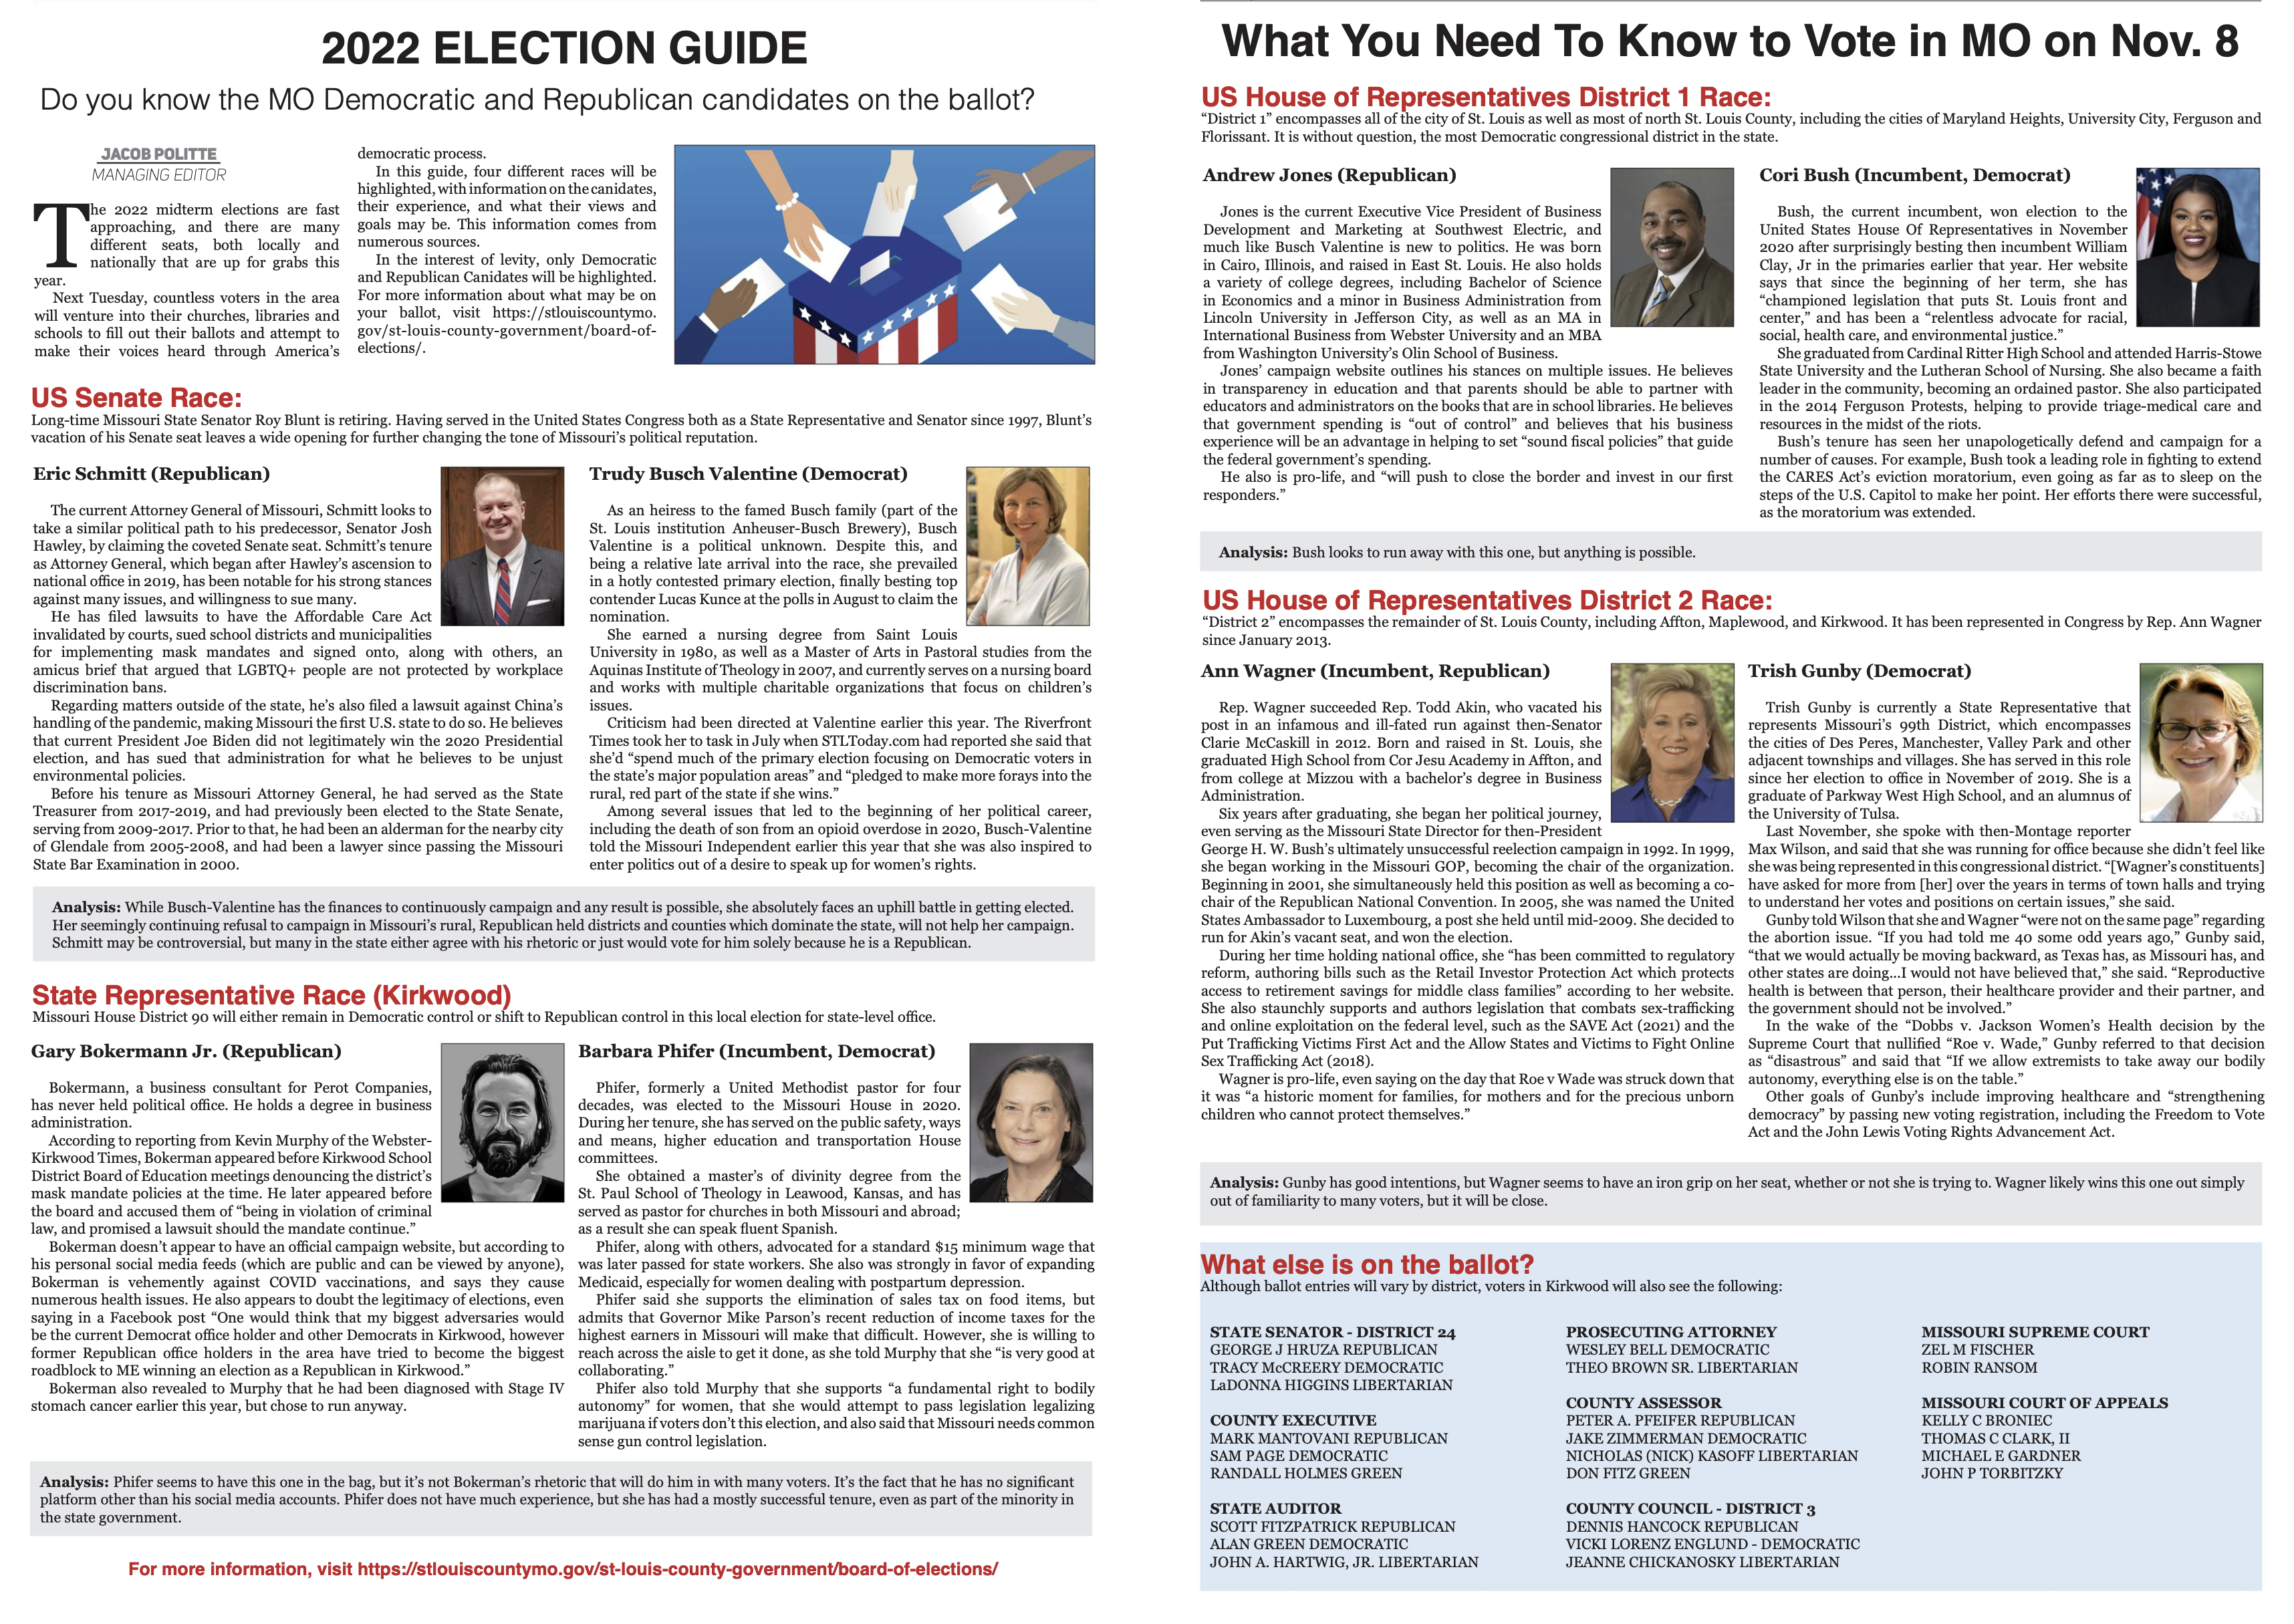 The 2022 Candidates Guide: Just the Facts